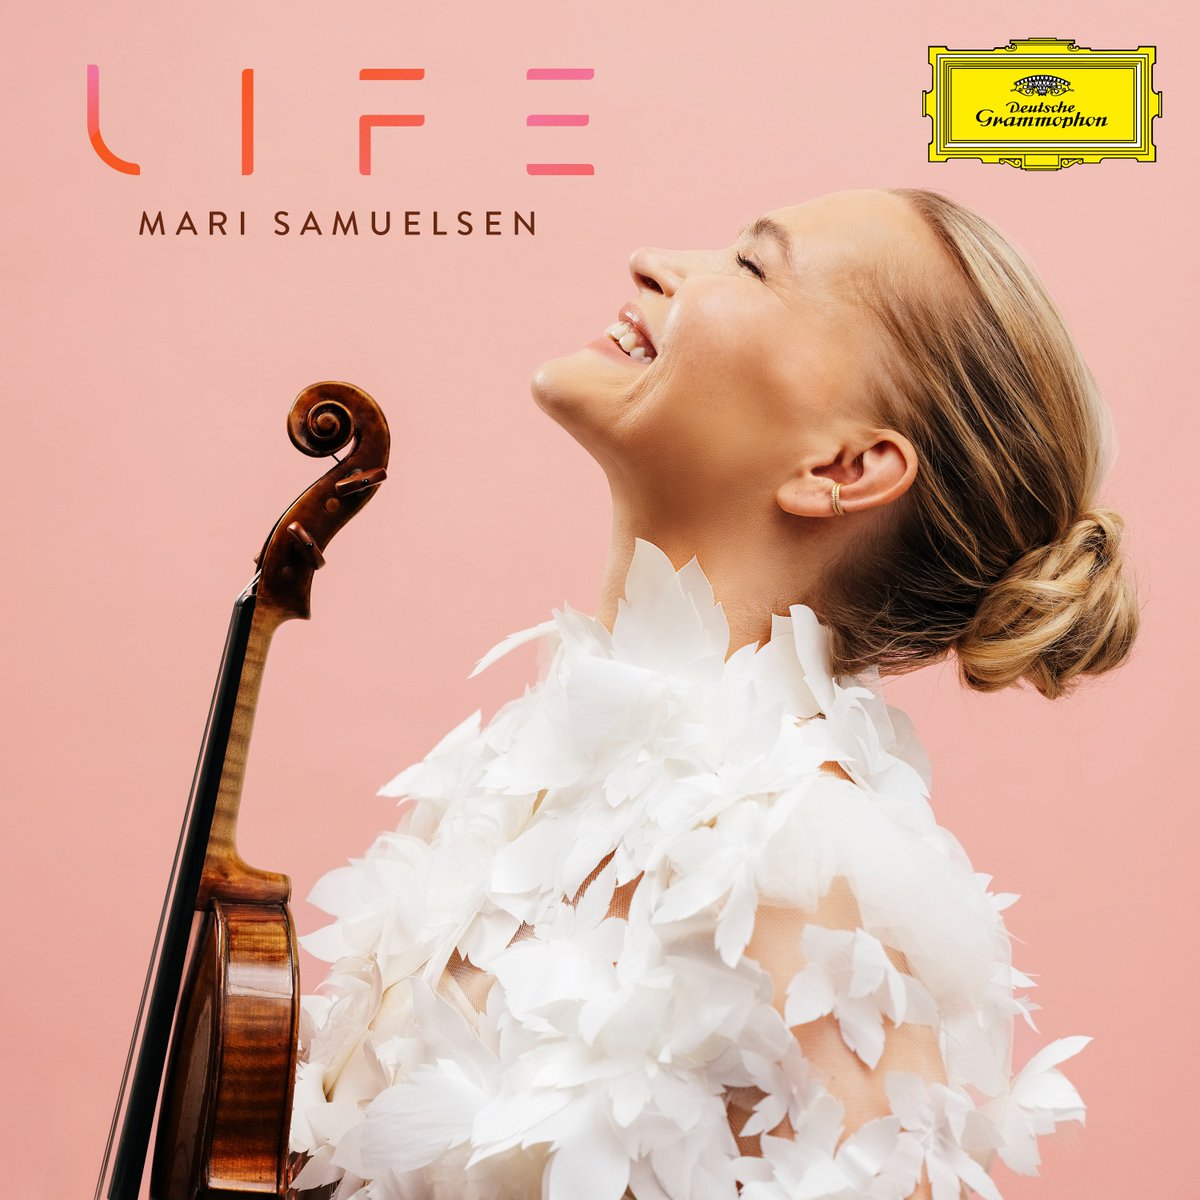 We are excited to present LIFE – @samuelsofficial’s third album for DG! Rich in contemporary colour and contrast, it is inspired by her experience of becoming a mother. Discover the first single – @belli_olivia’s uplifting work Sapias. 🎧 → dg.lnk.to/SamuelsenLife